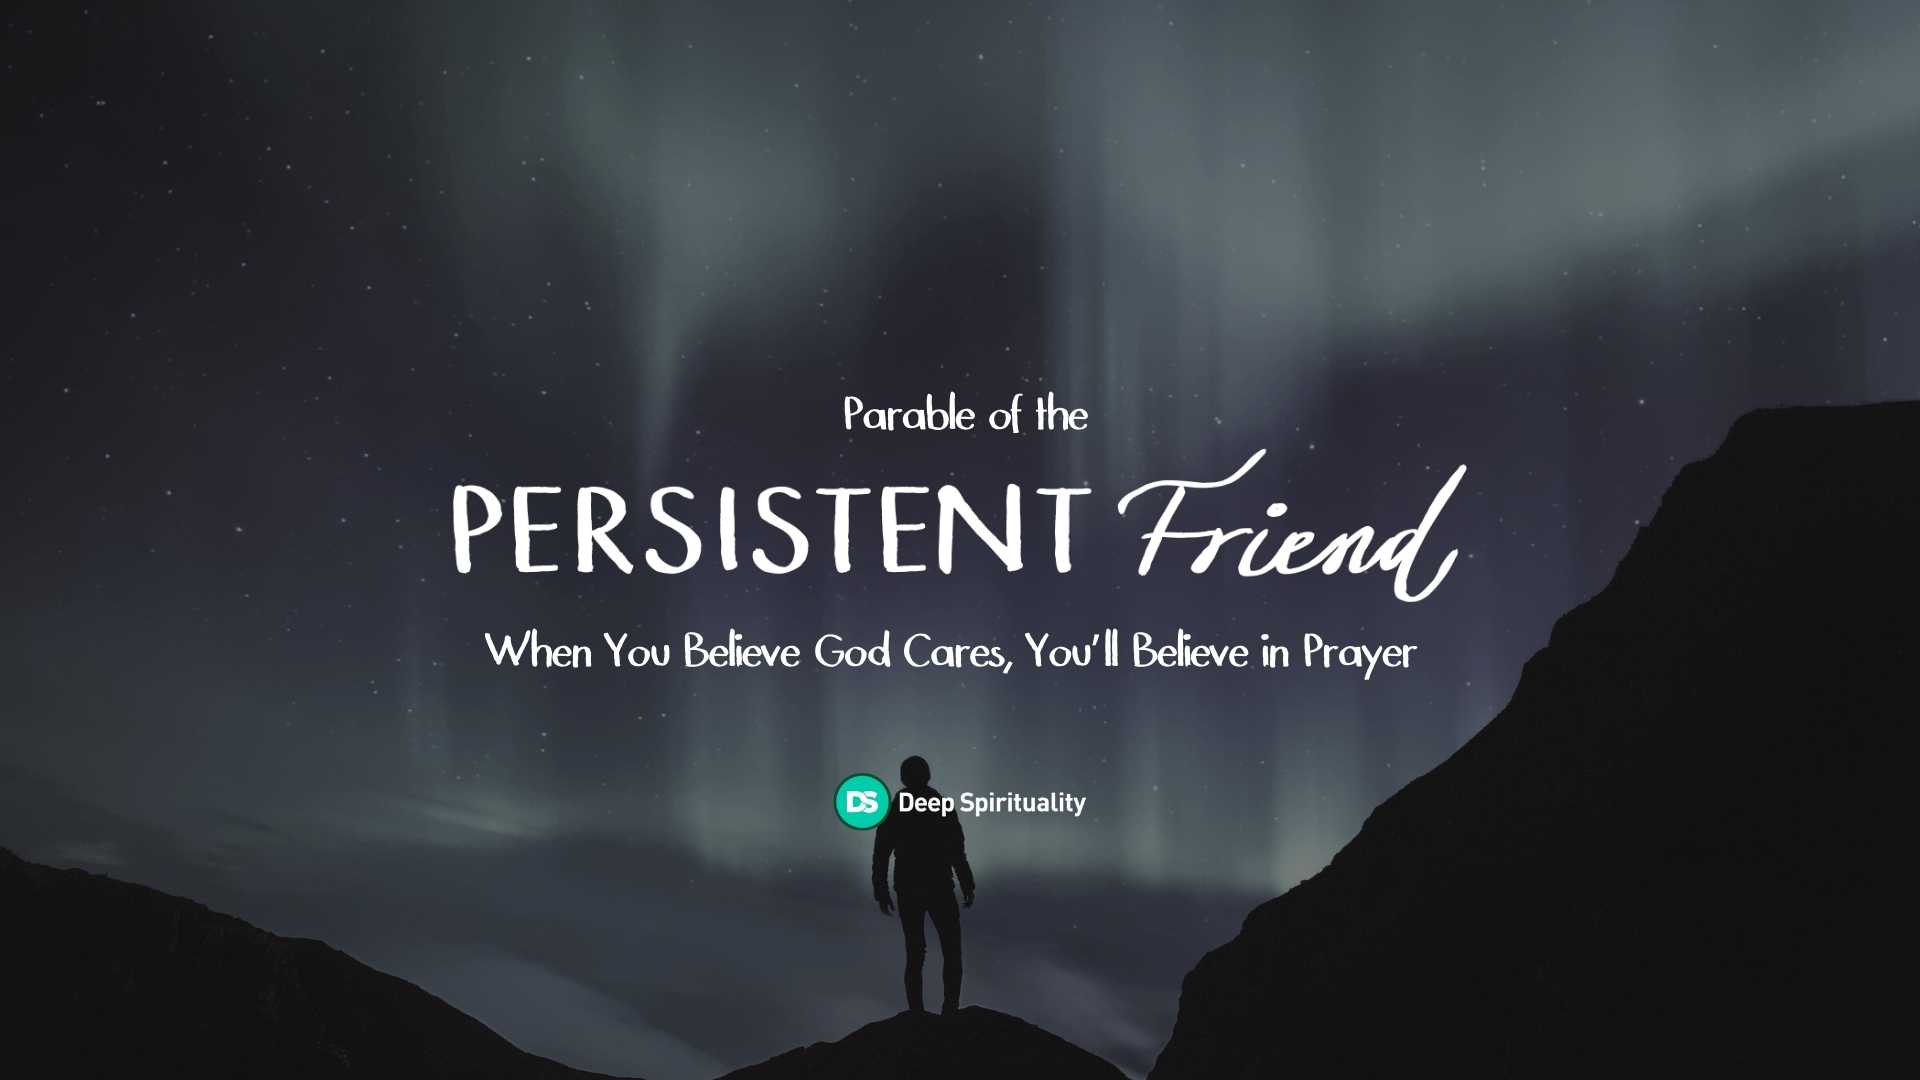 You Can Count On Me: What We Should Learn from the Parable of the Persistent Friend 2